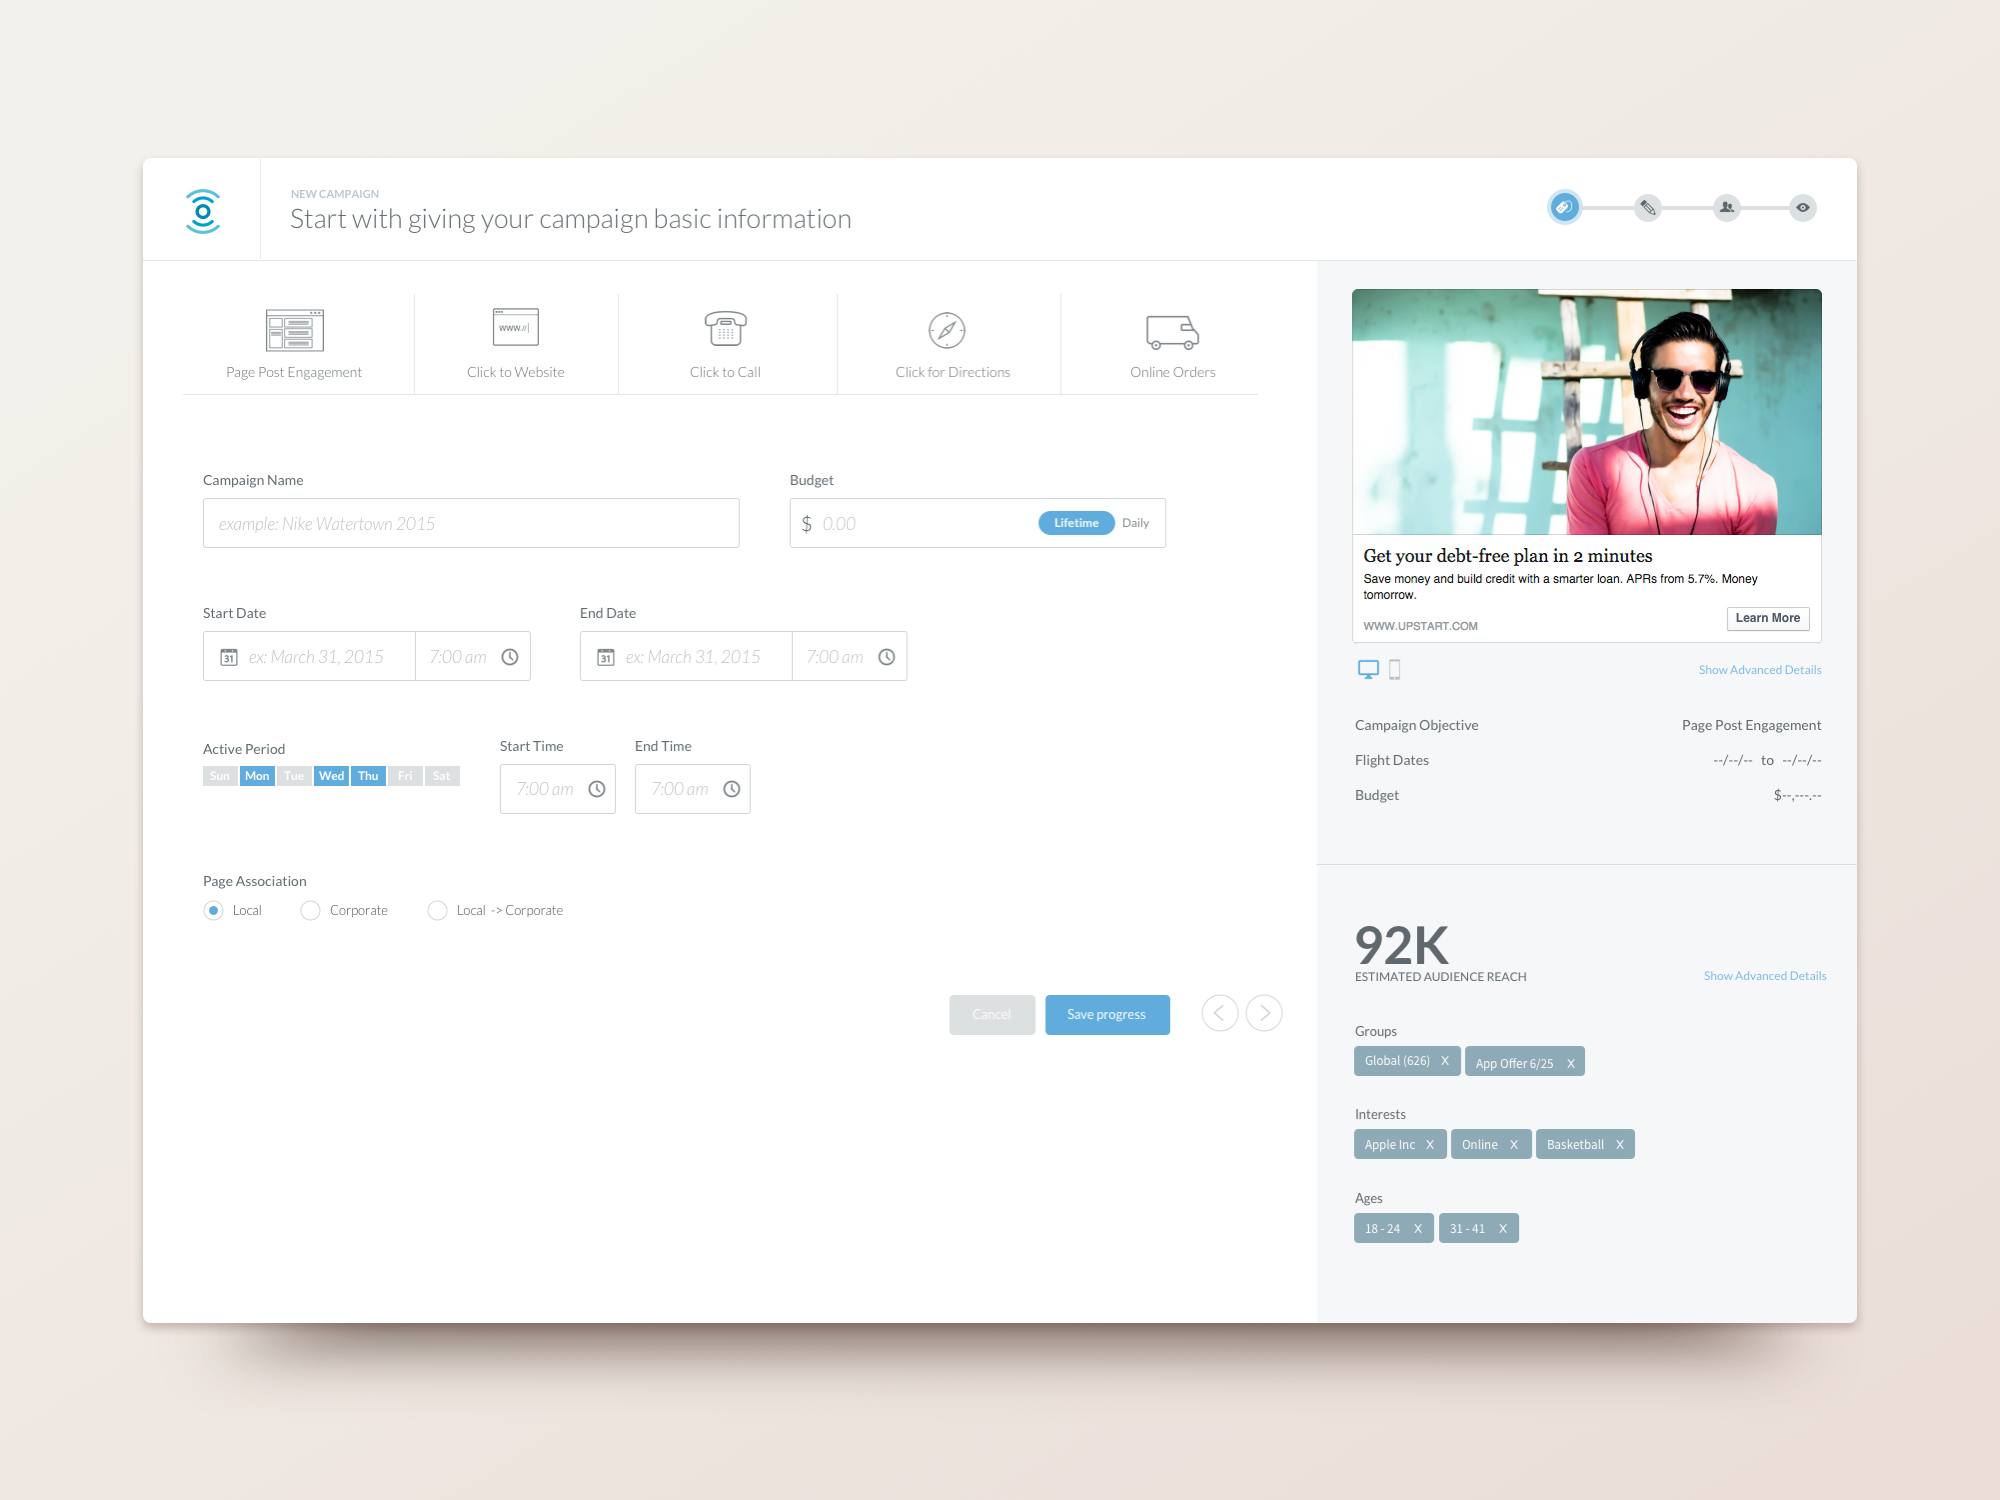 Dribbble - campaign-builder-large.png by Corey Haggard